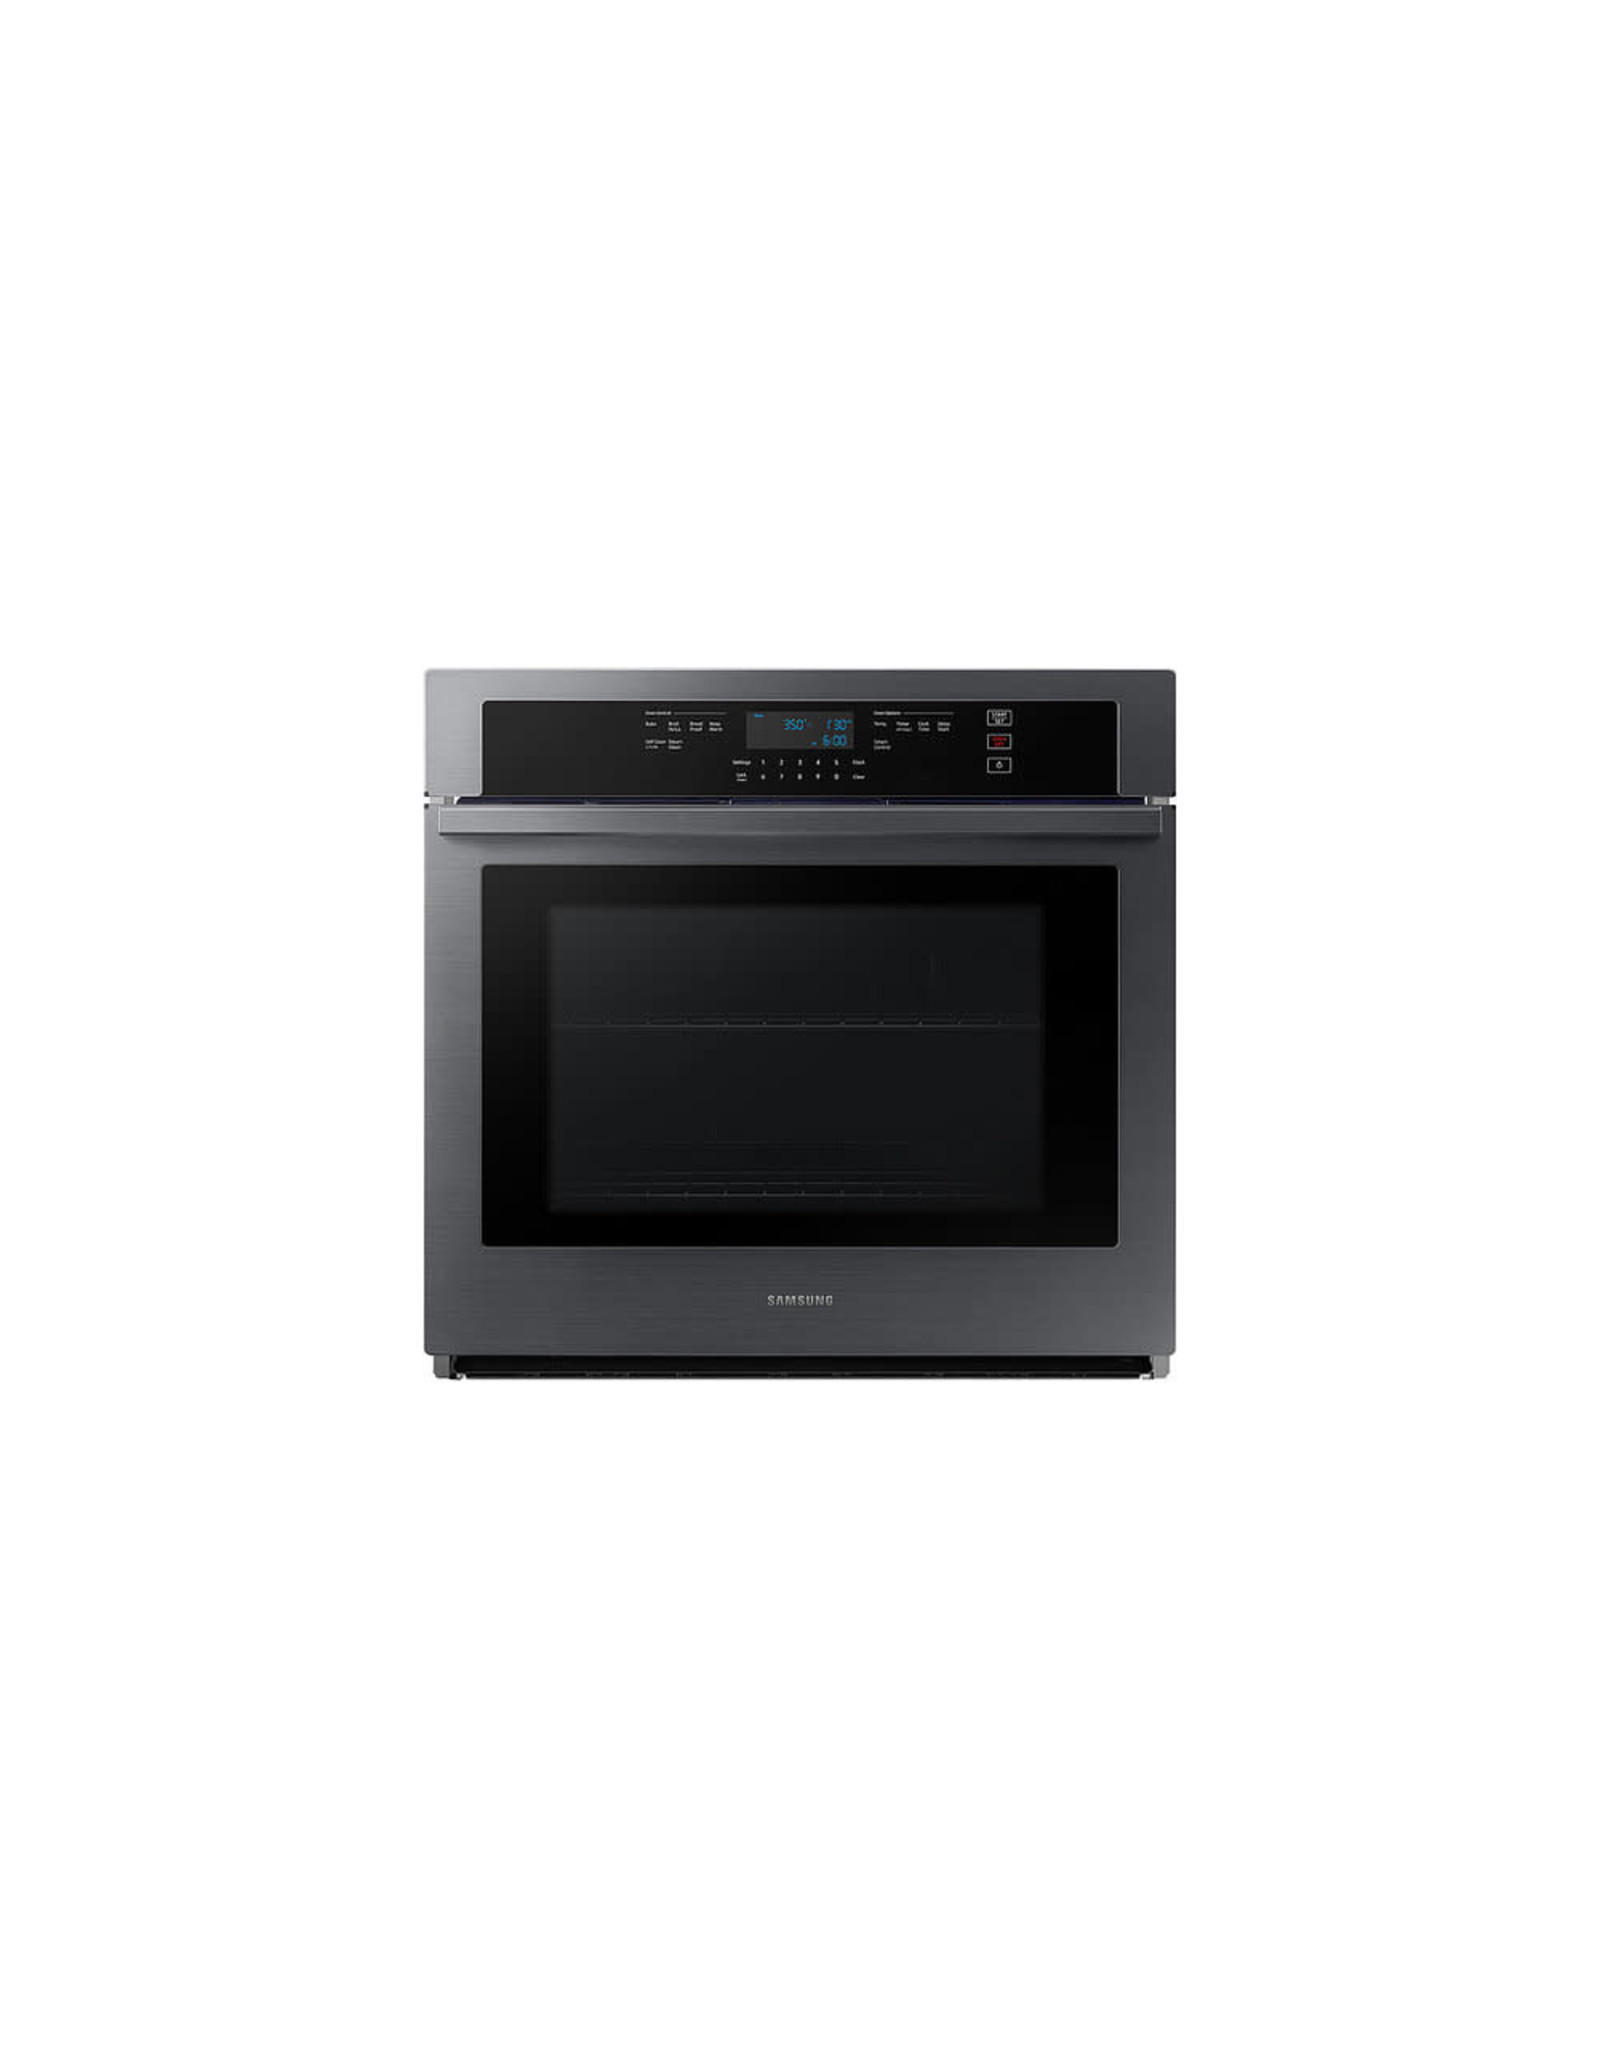 NV51T5511SG 30 in. Smart Single Wall Oven in Black Stainless Steel